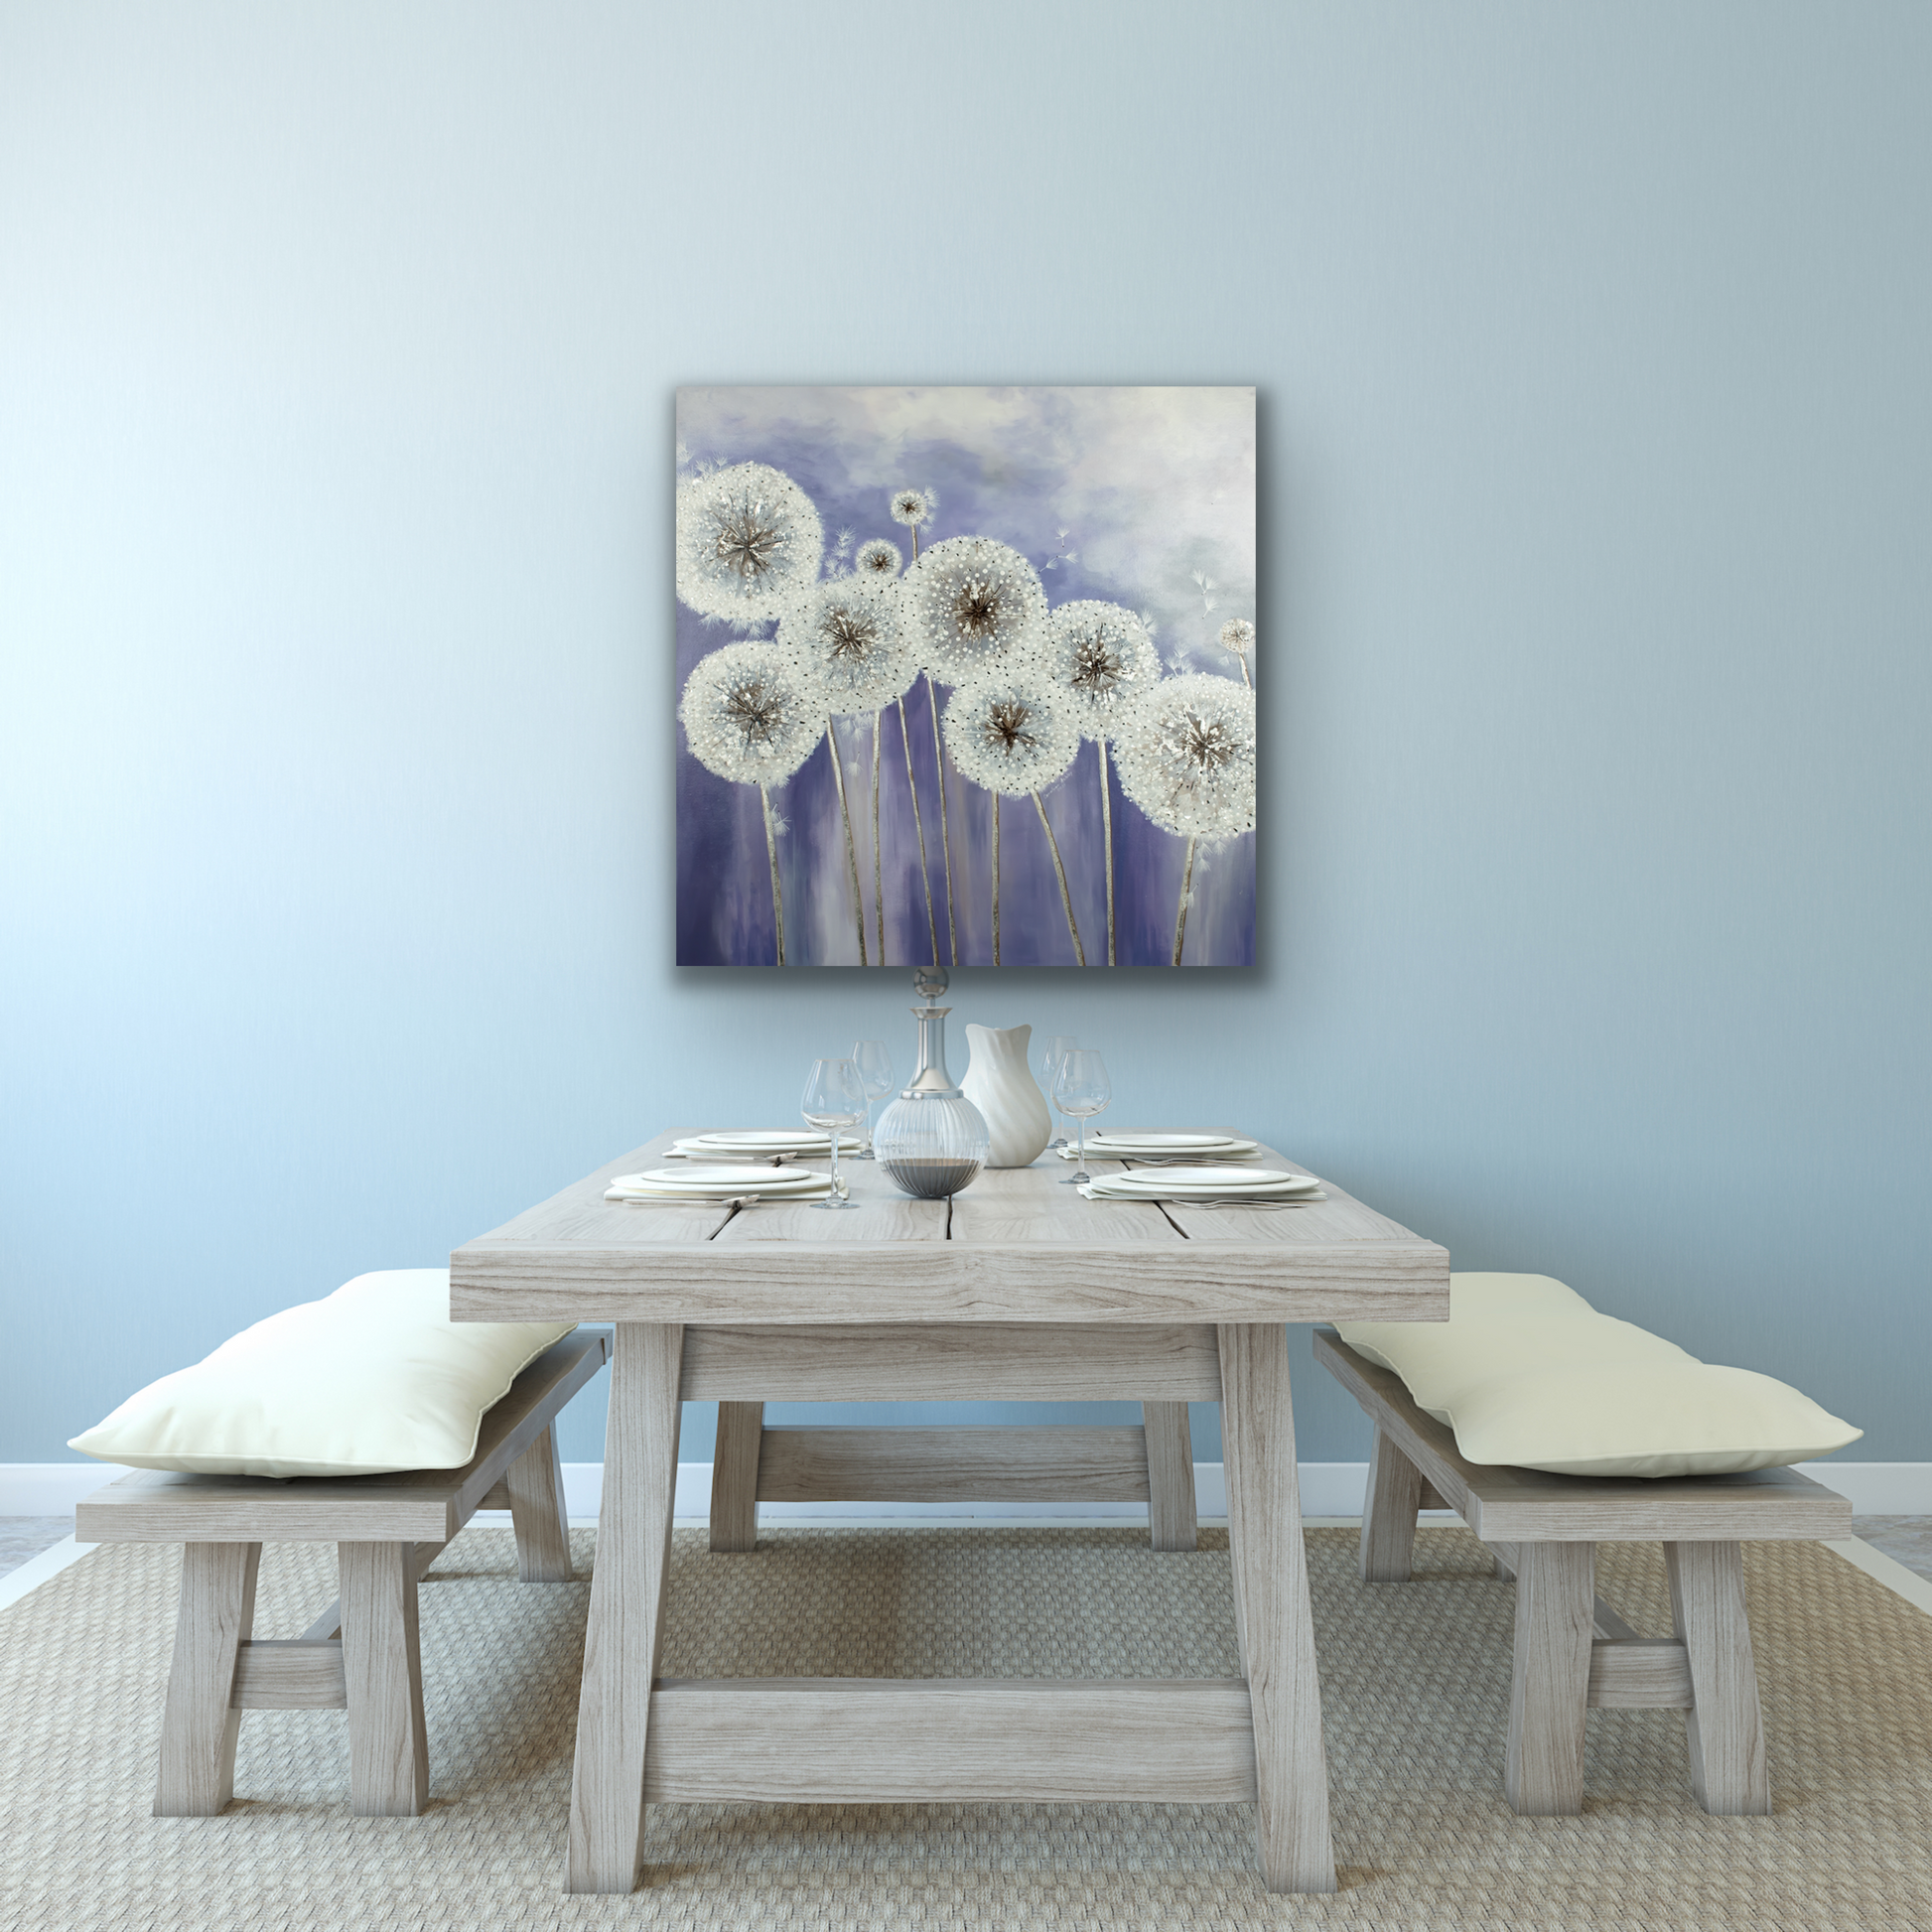 "Touchee" art of work will look great in your dining room, bedroom or living room.